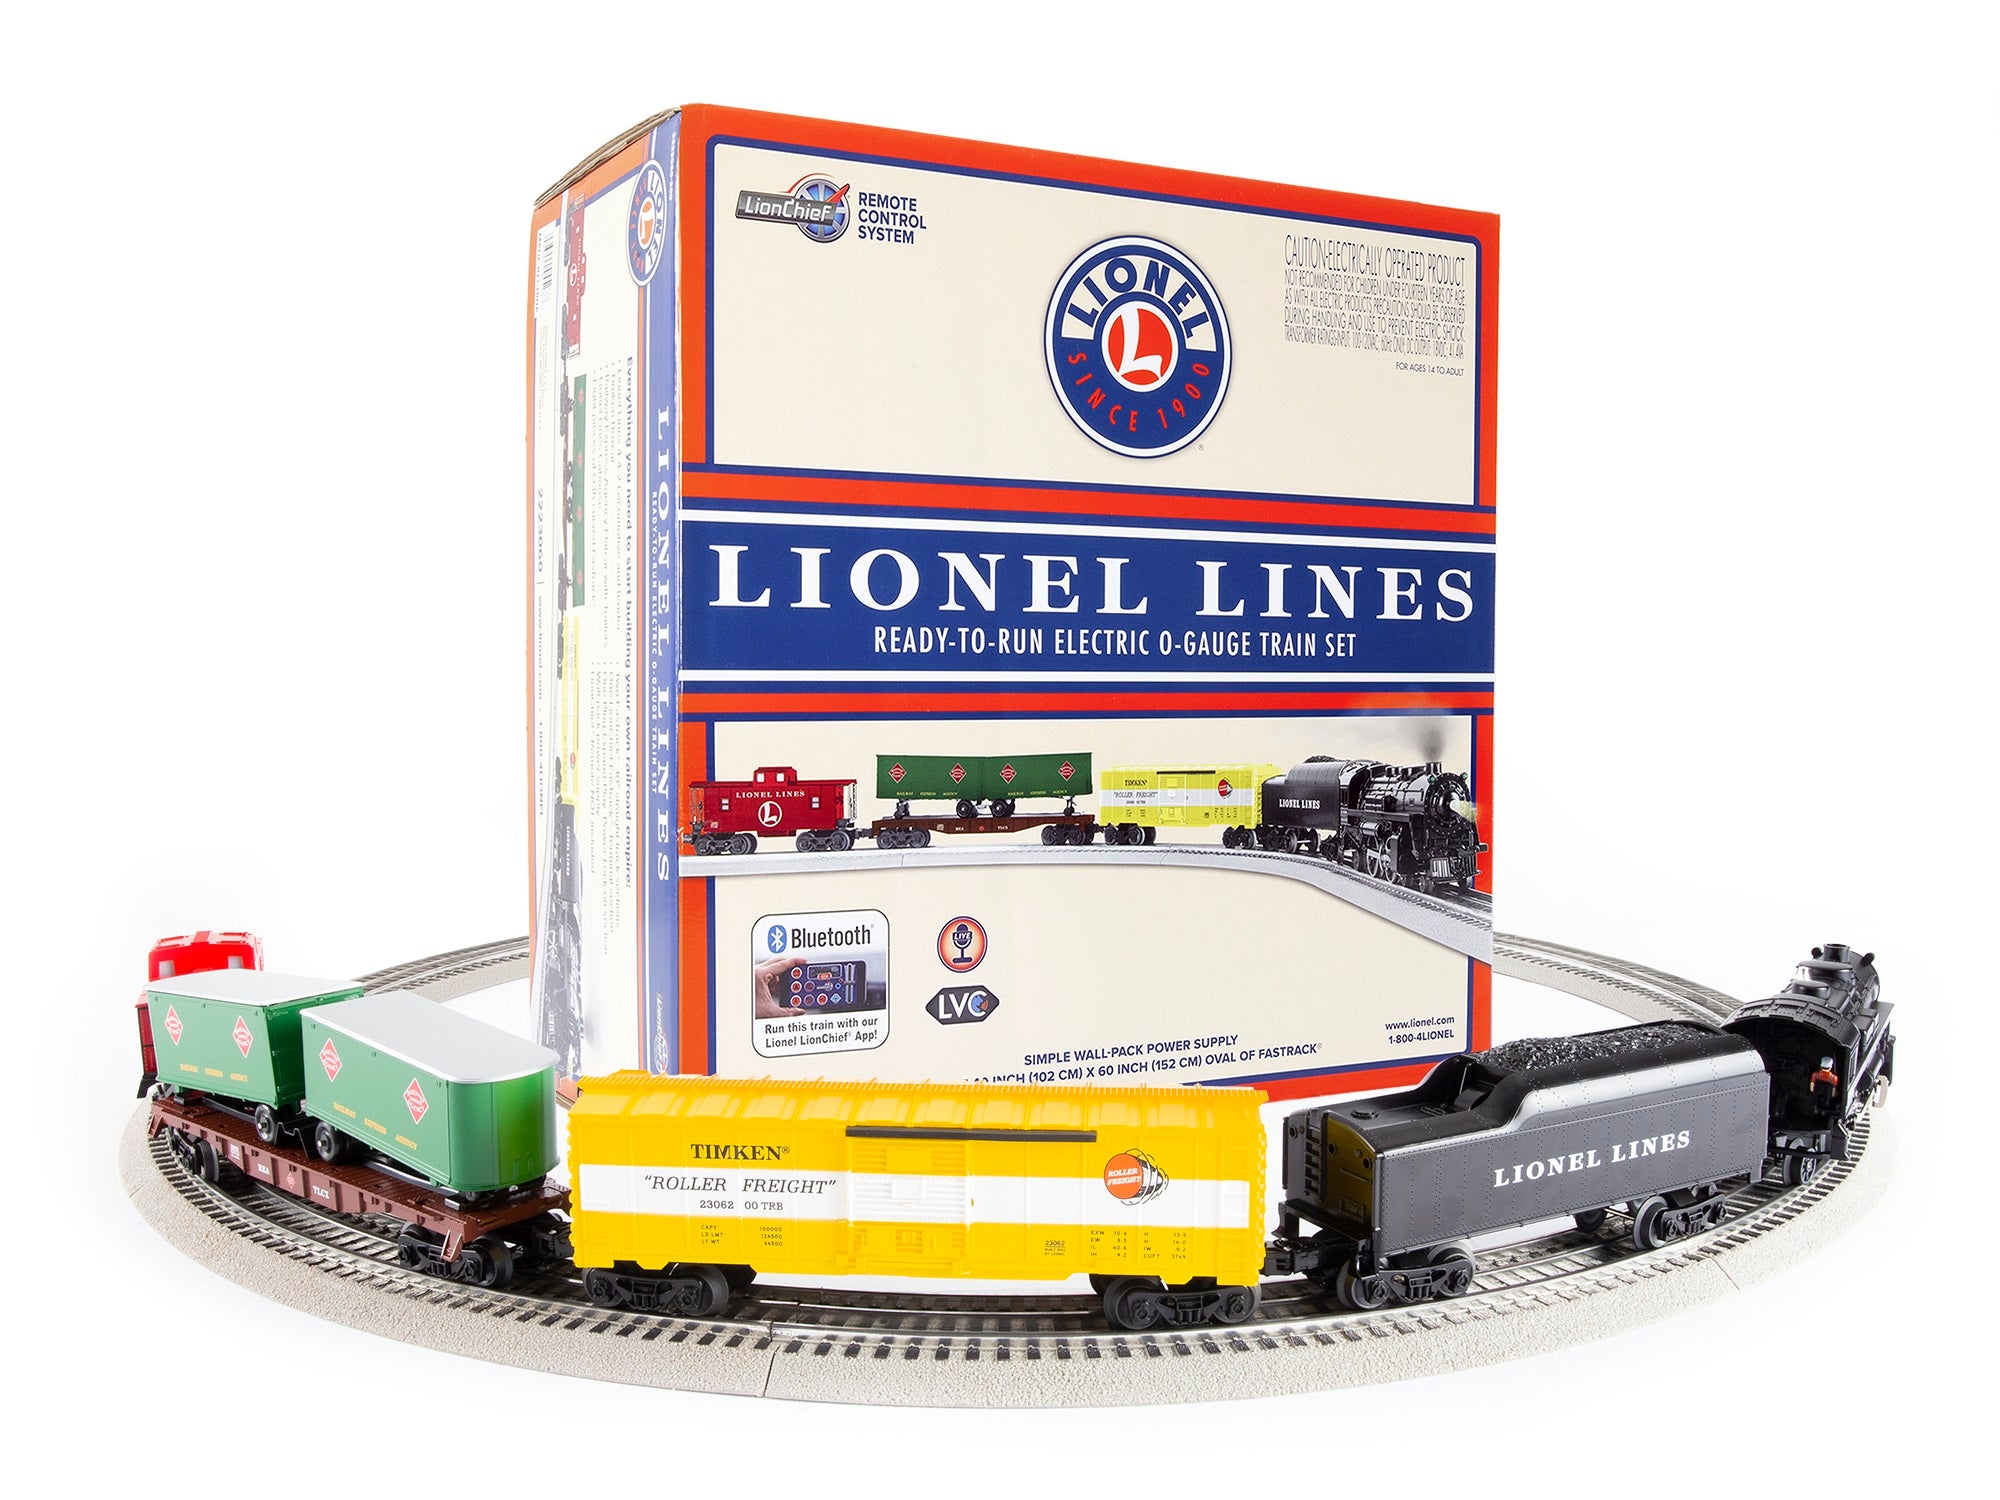 Lionel 2223060 - Mixed Freight Set "Lionel Lines" Bluetoo – MrMuffin'sTrains